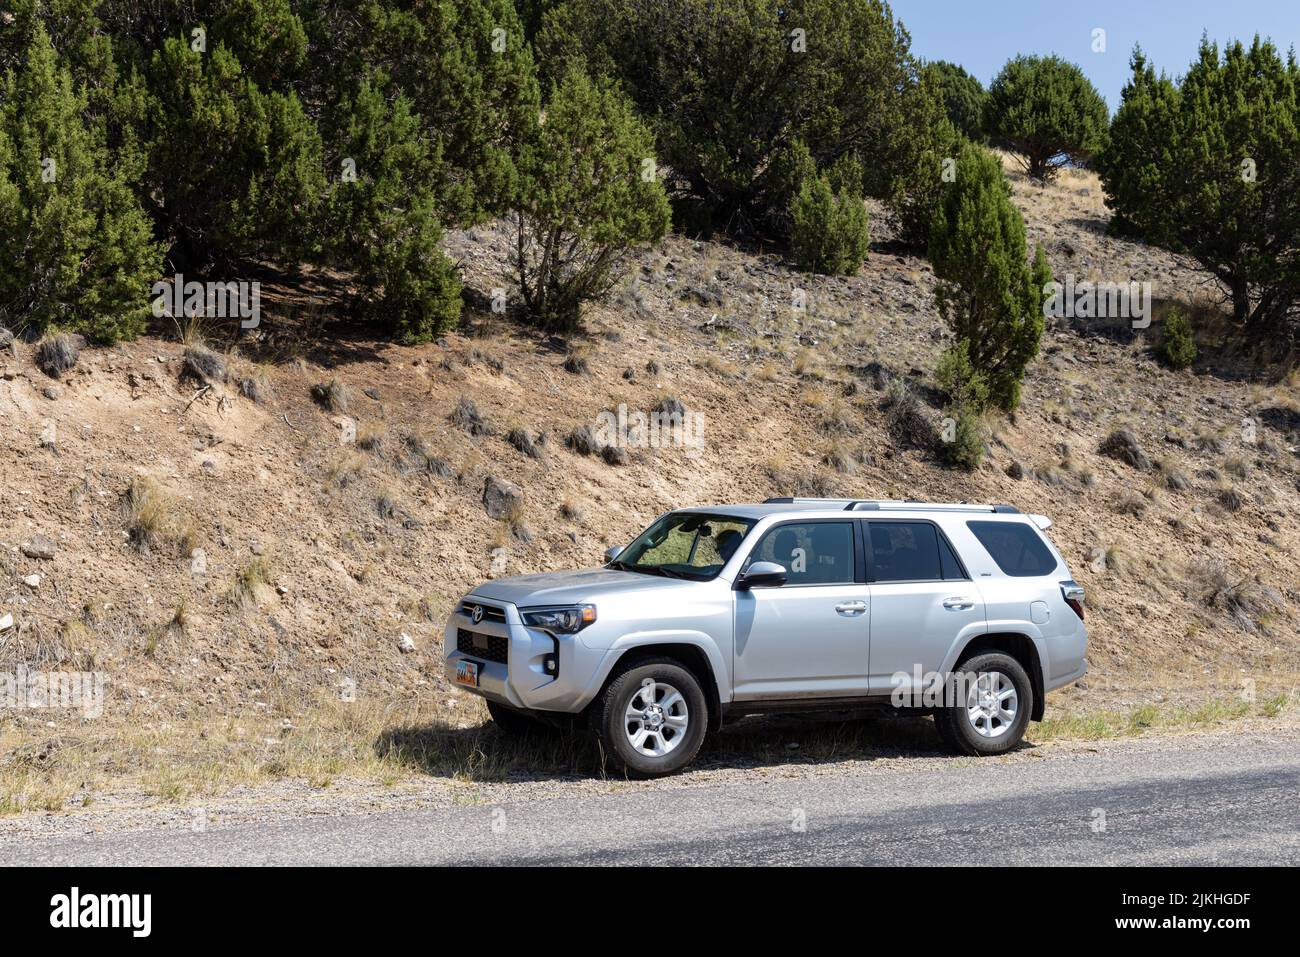 A gray Toyota 4 runner SUV on a mountain drive Stock Photo